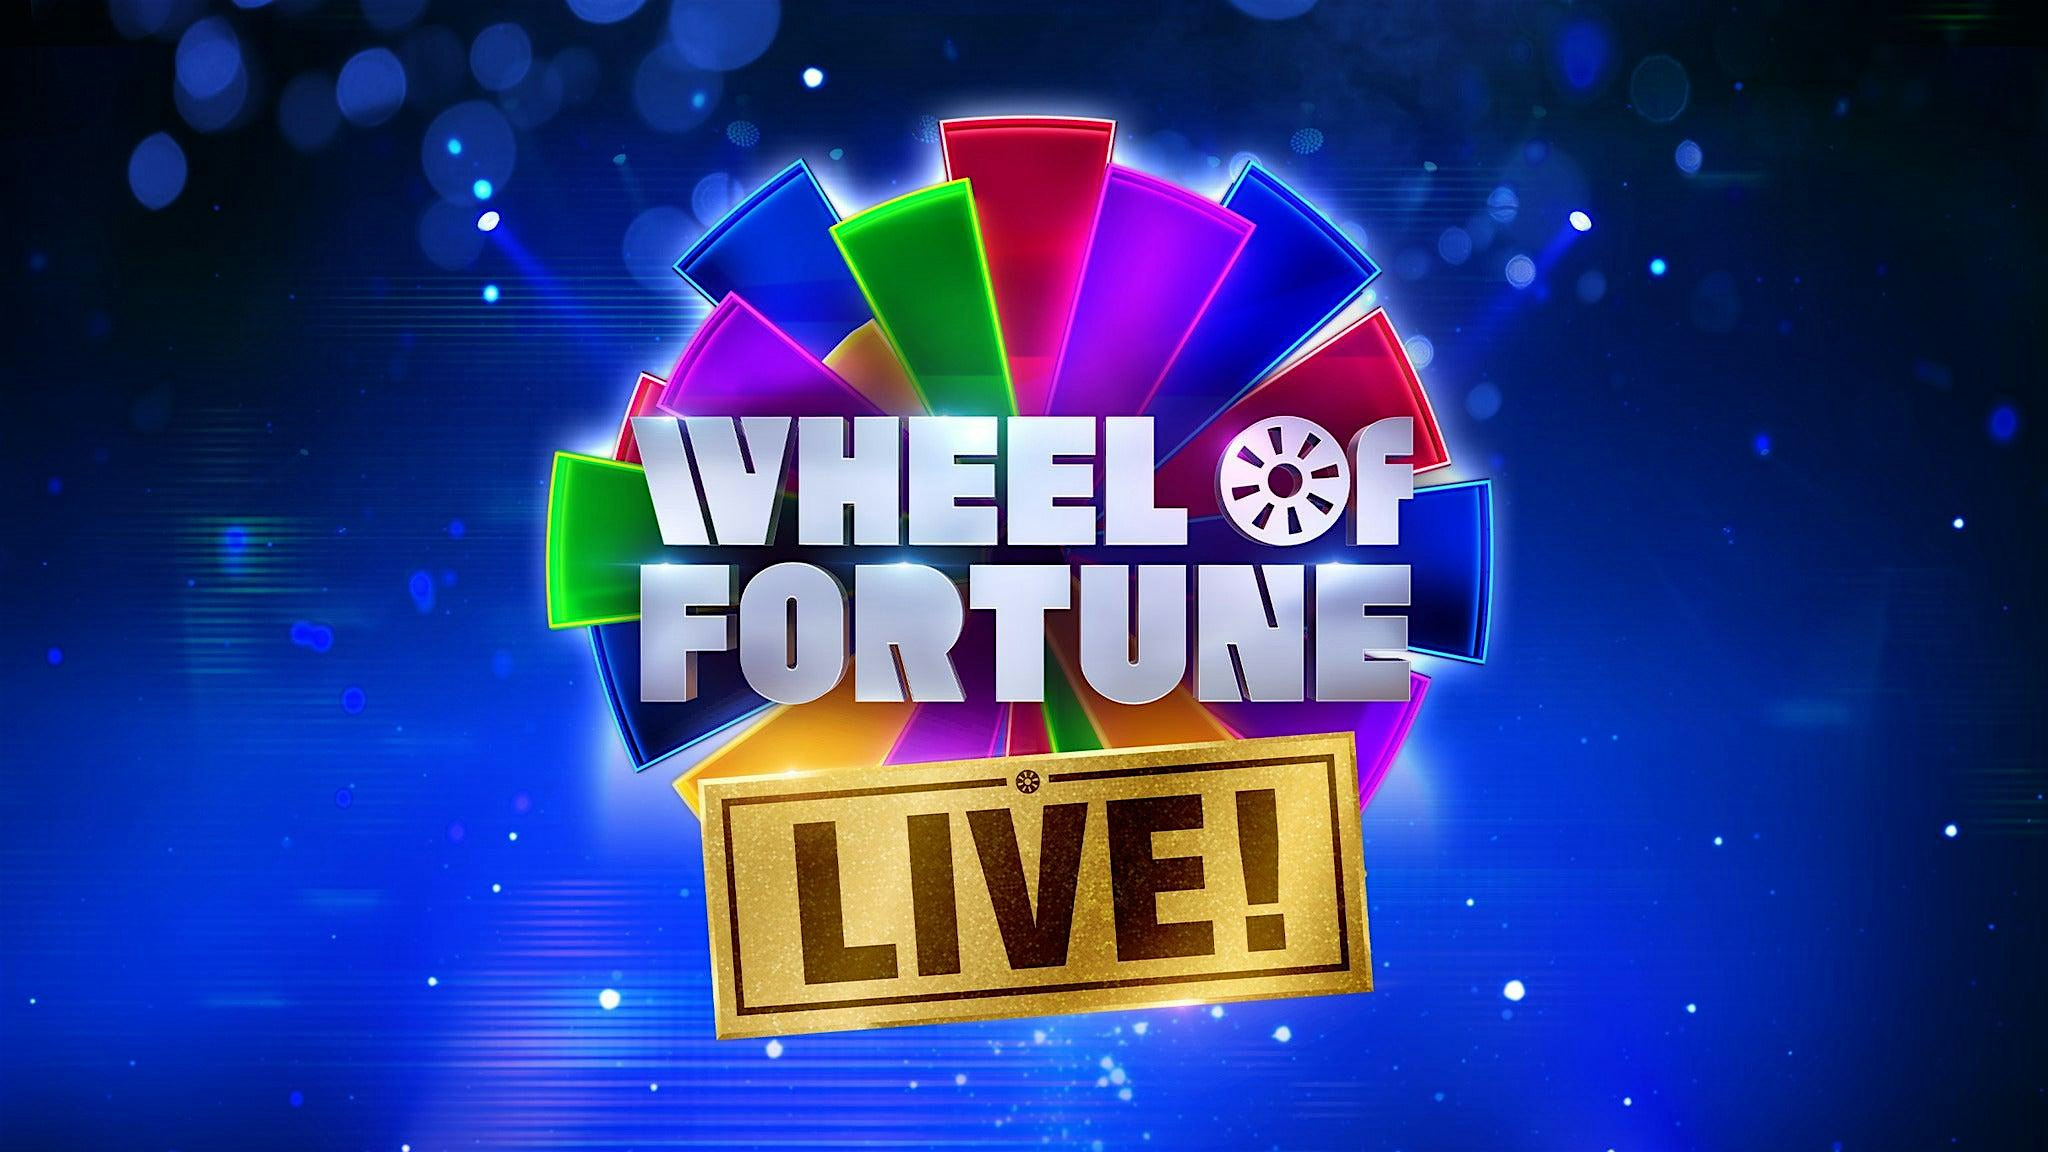 Wheel of Fortune LIVE!